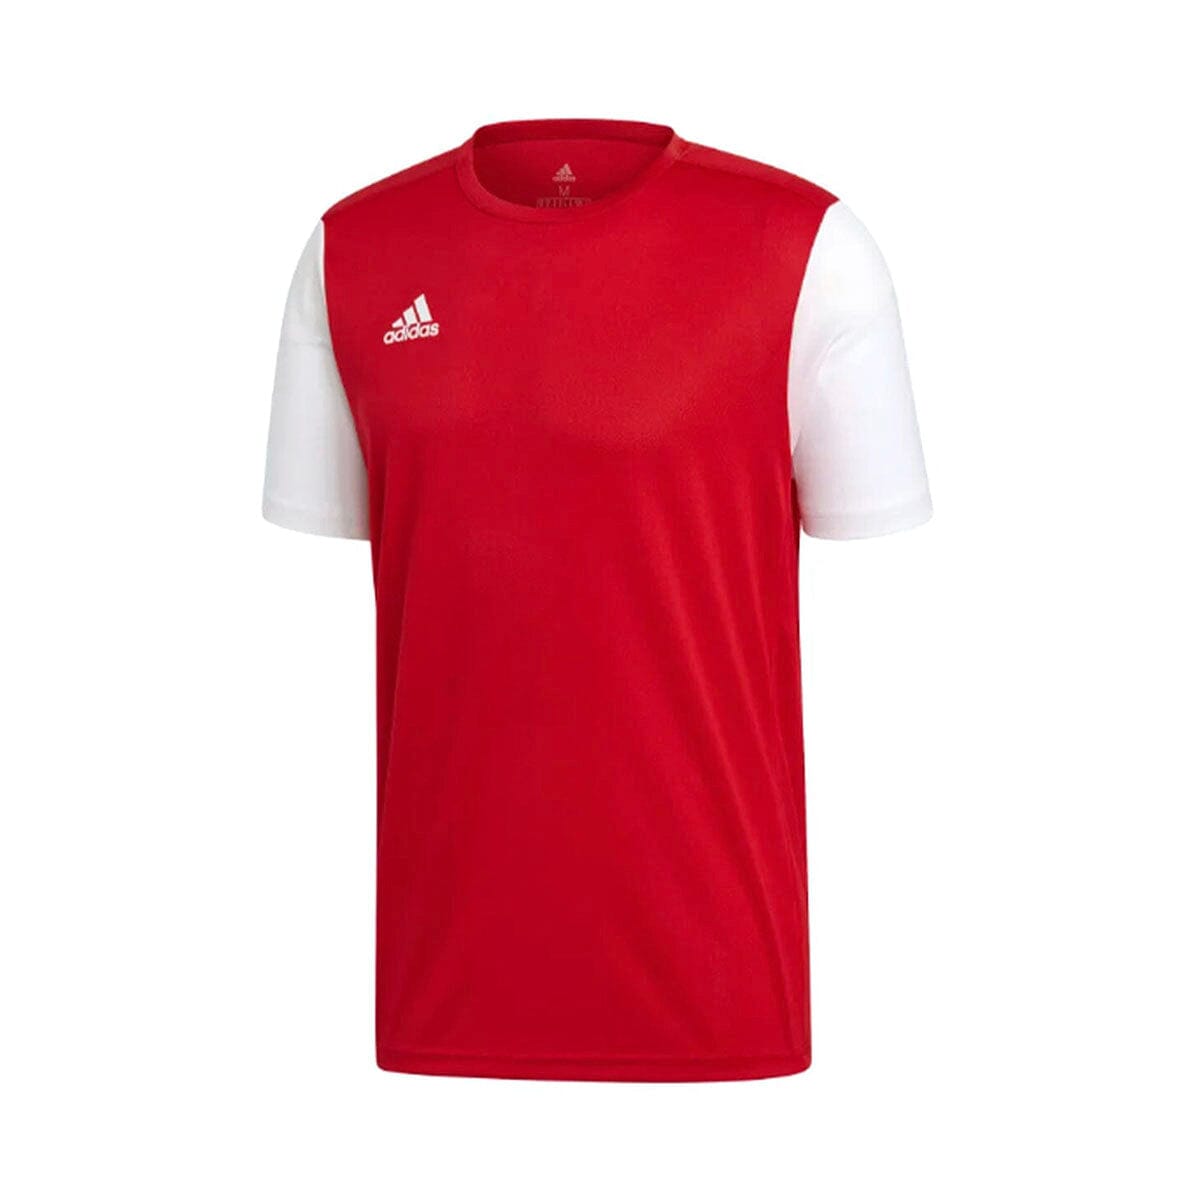 adidas Men's Estro 19 Jersey | DP3230 Jersey Adidas Adult X-Small Power Red 